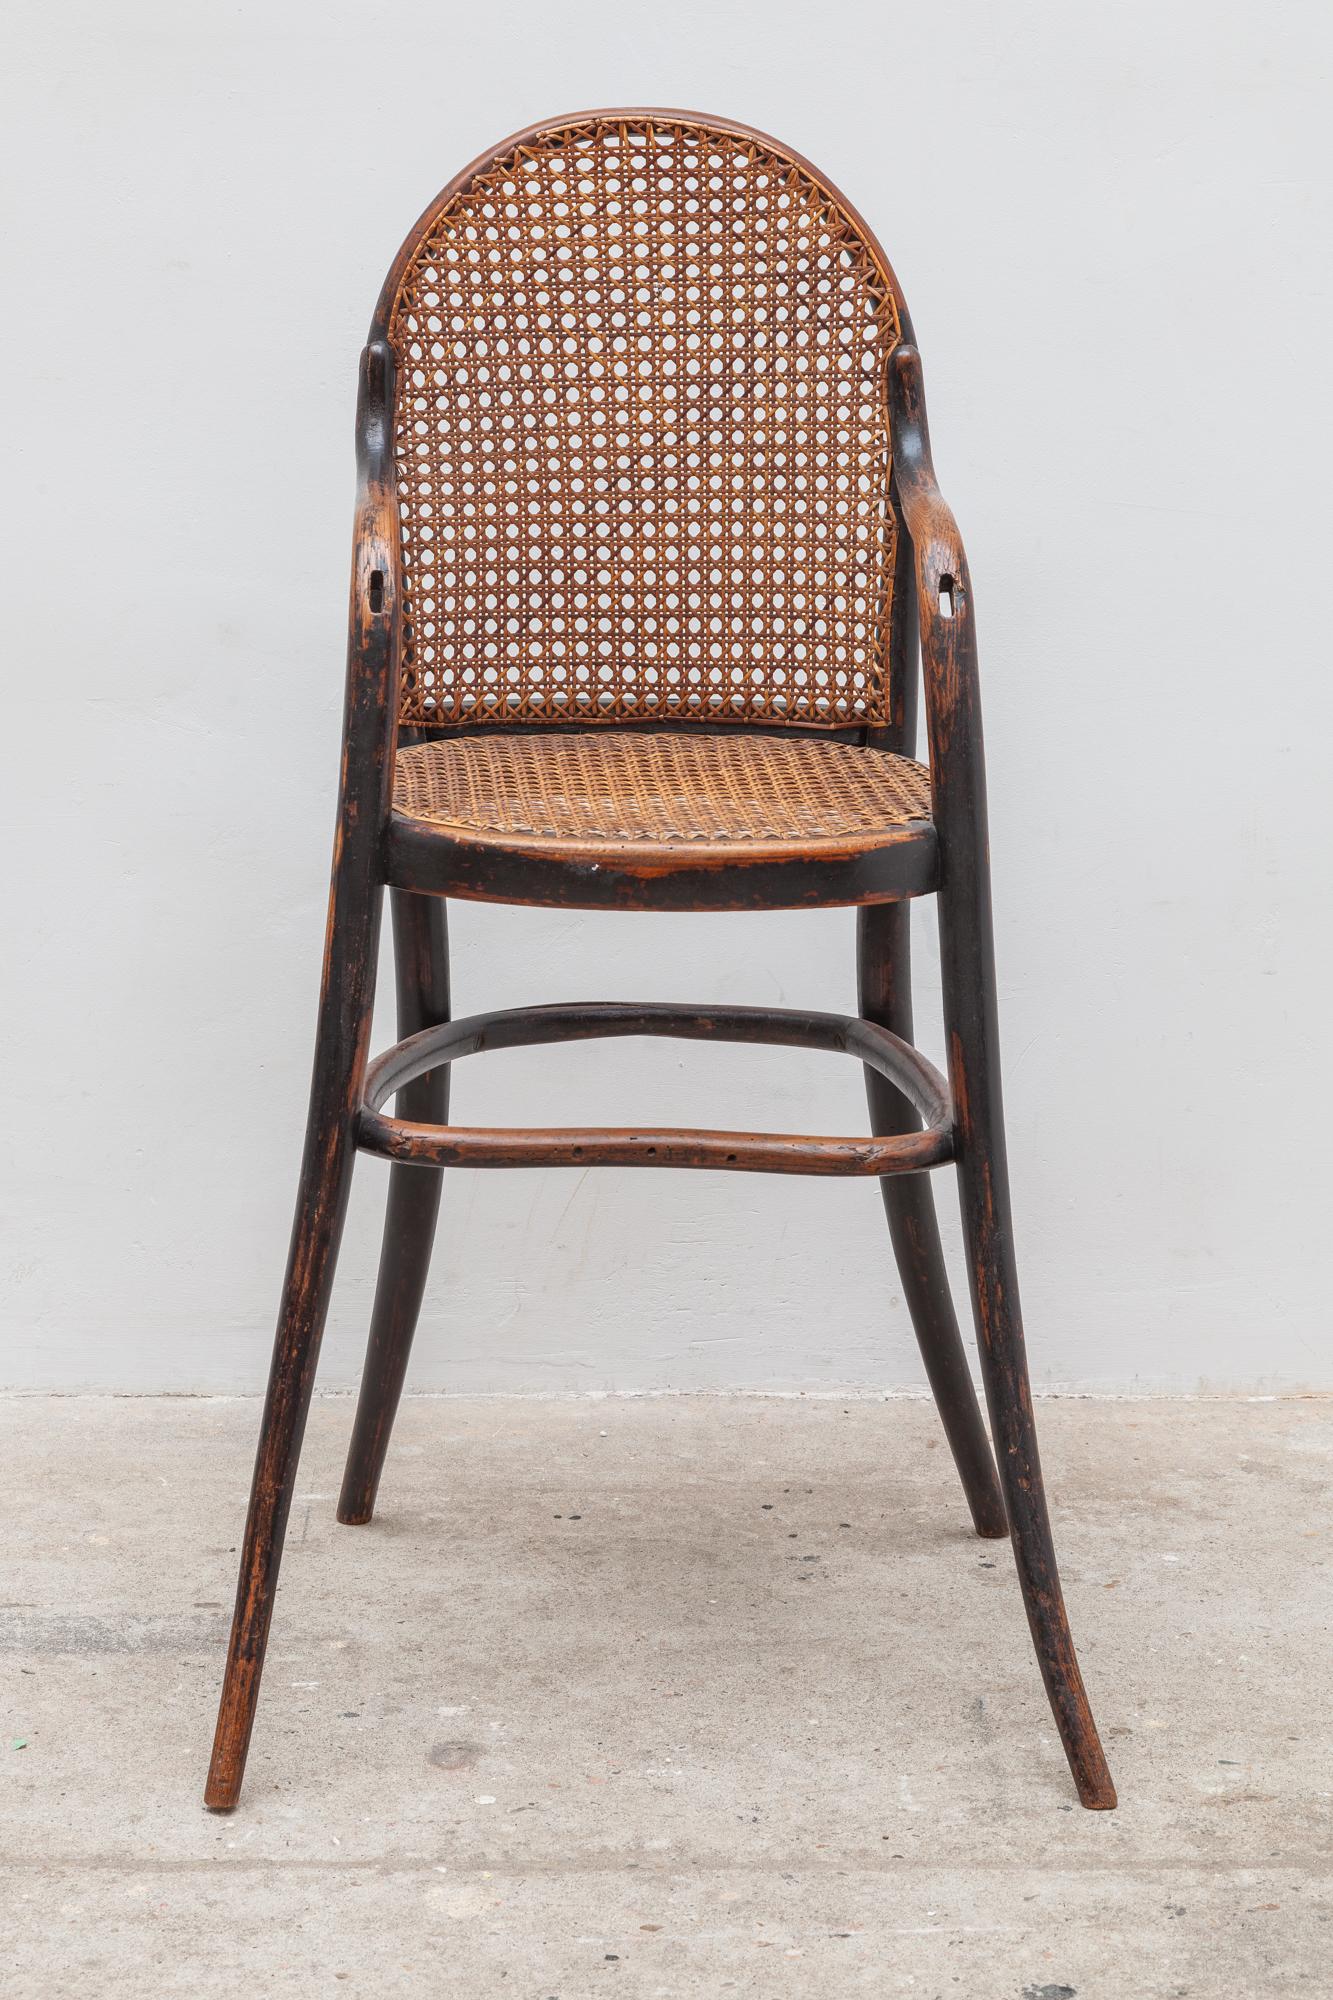 Antique child’s chair of Thonet. Elegant bent wood frame with hooped legs. The caning on the seat and
back is in great condition for it’s age. Dimensions: 50W x 90H x 32D cm, Seat: 53 cm high.